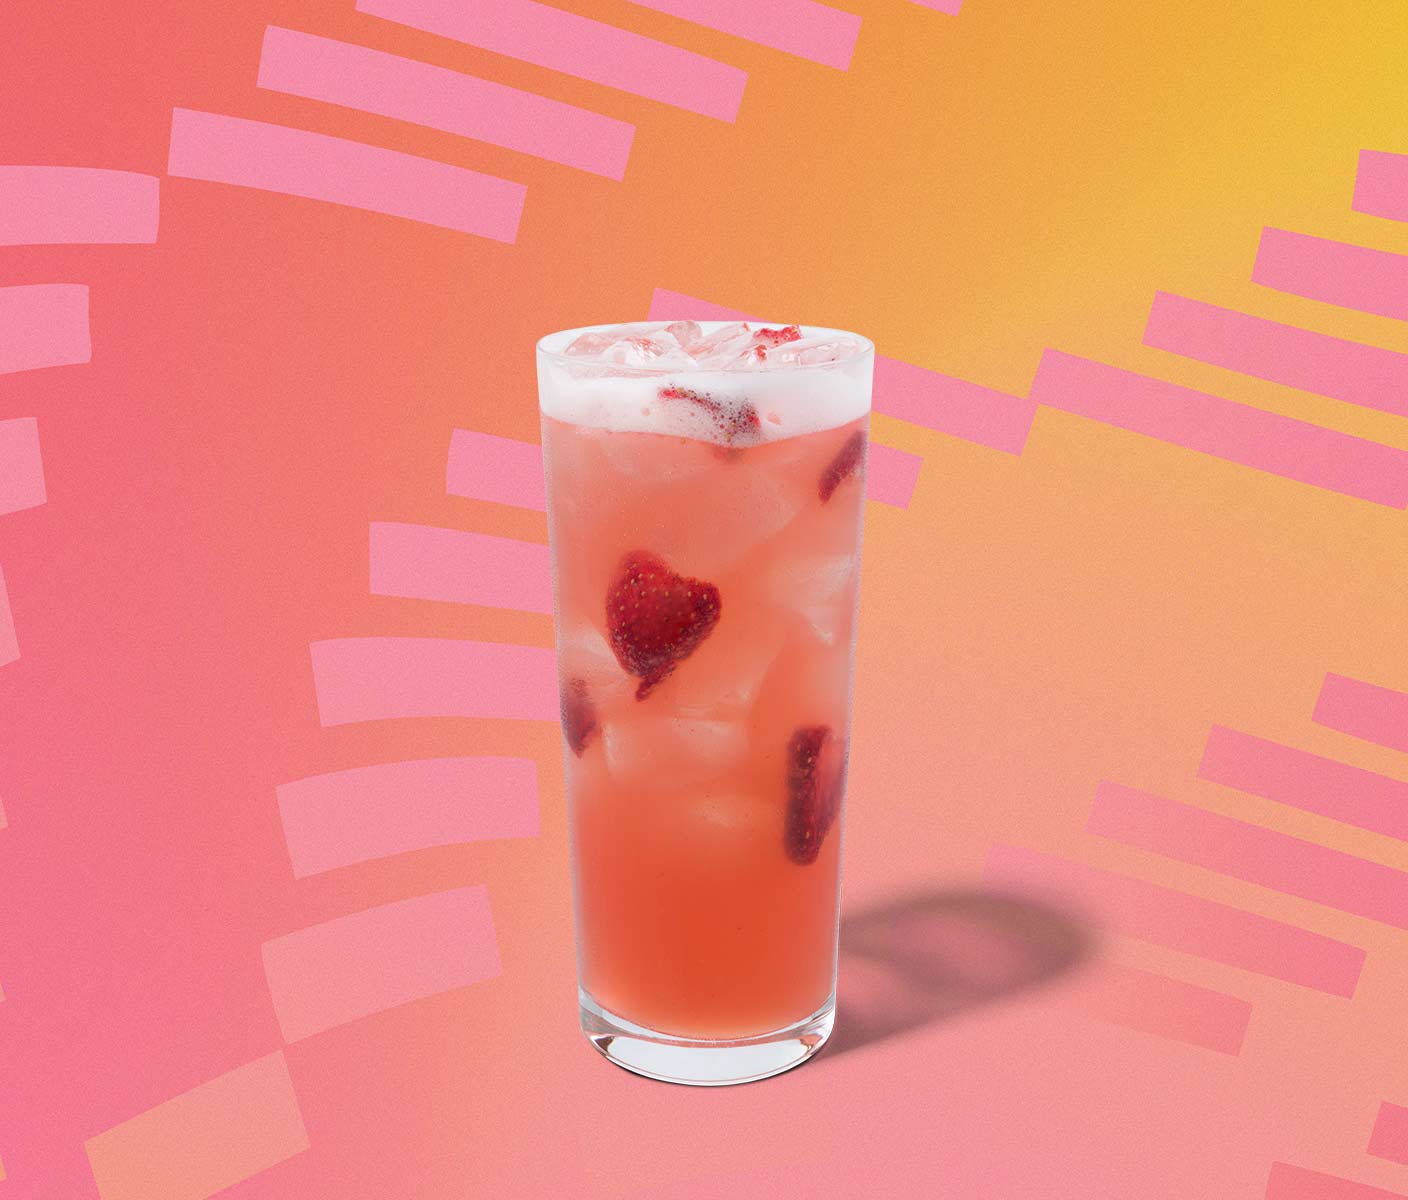 Pink iced drink with strawberry inclusions in a tall glass